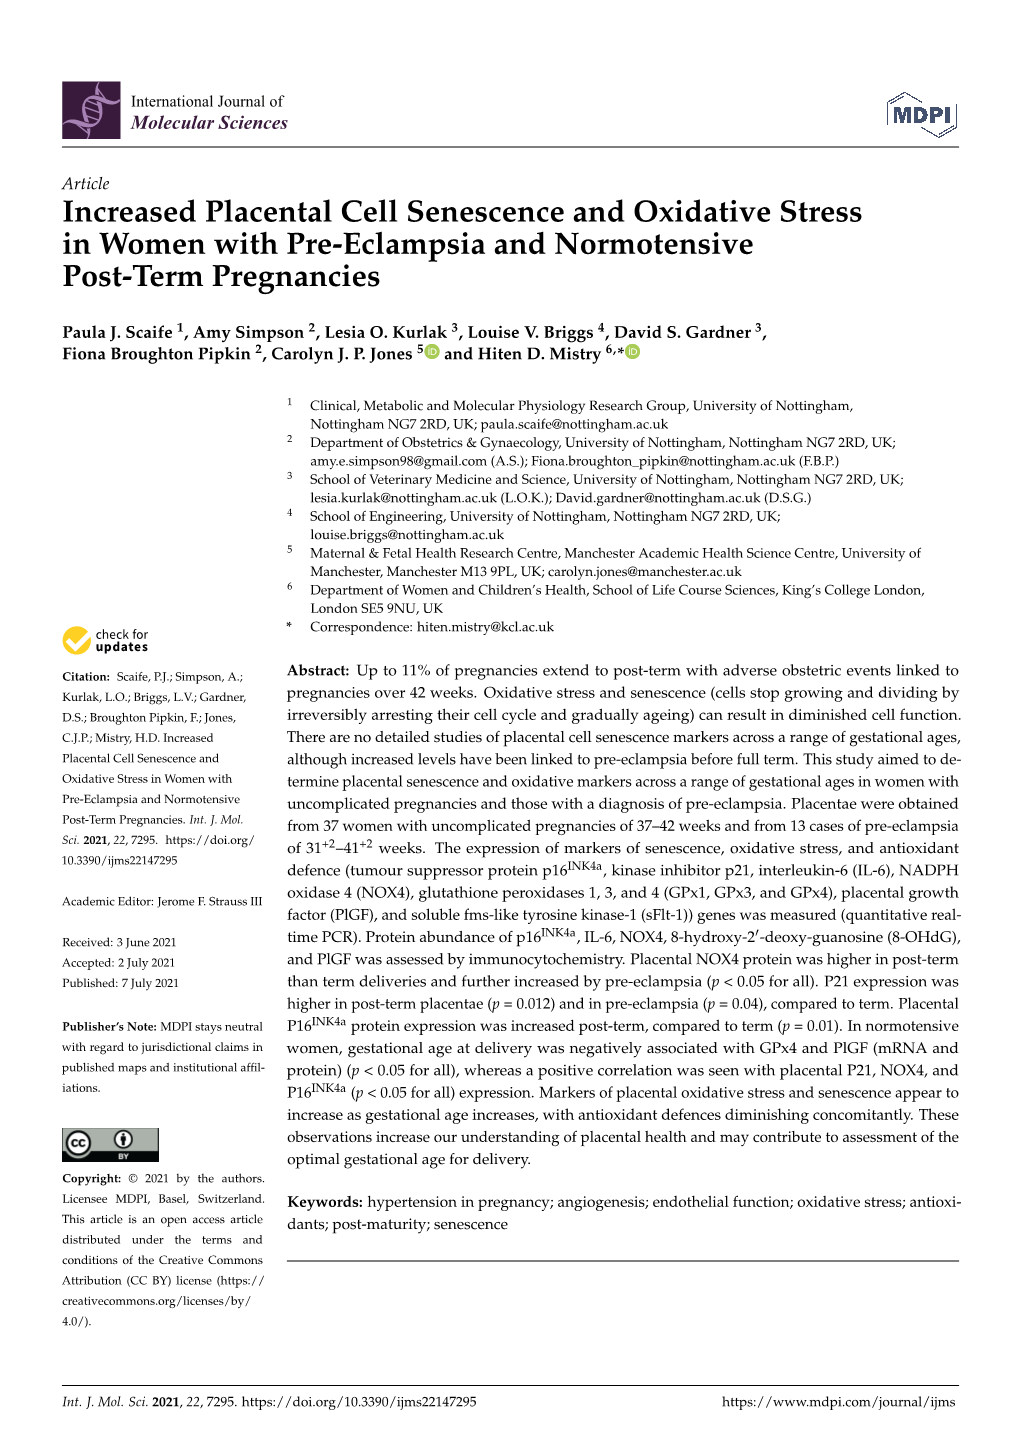 Increased Placental Cell Senescence and Oxidative Stress in Women with Pre-Eclampsia and Normotensive Post-Term Pregnancies